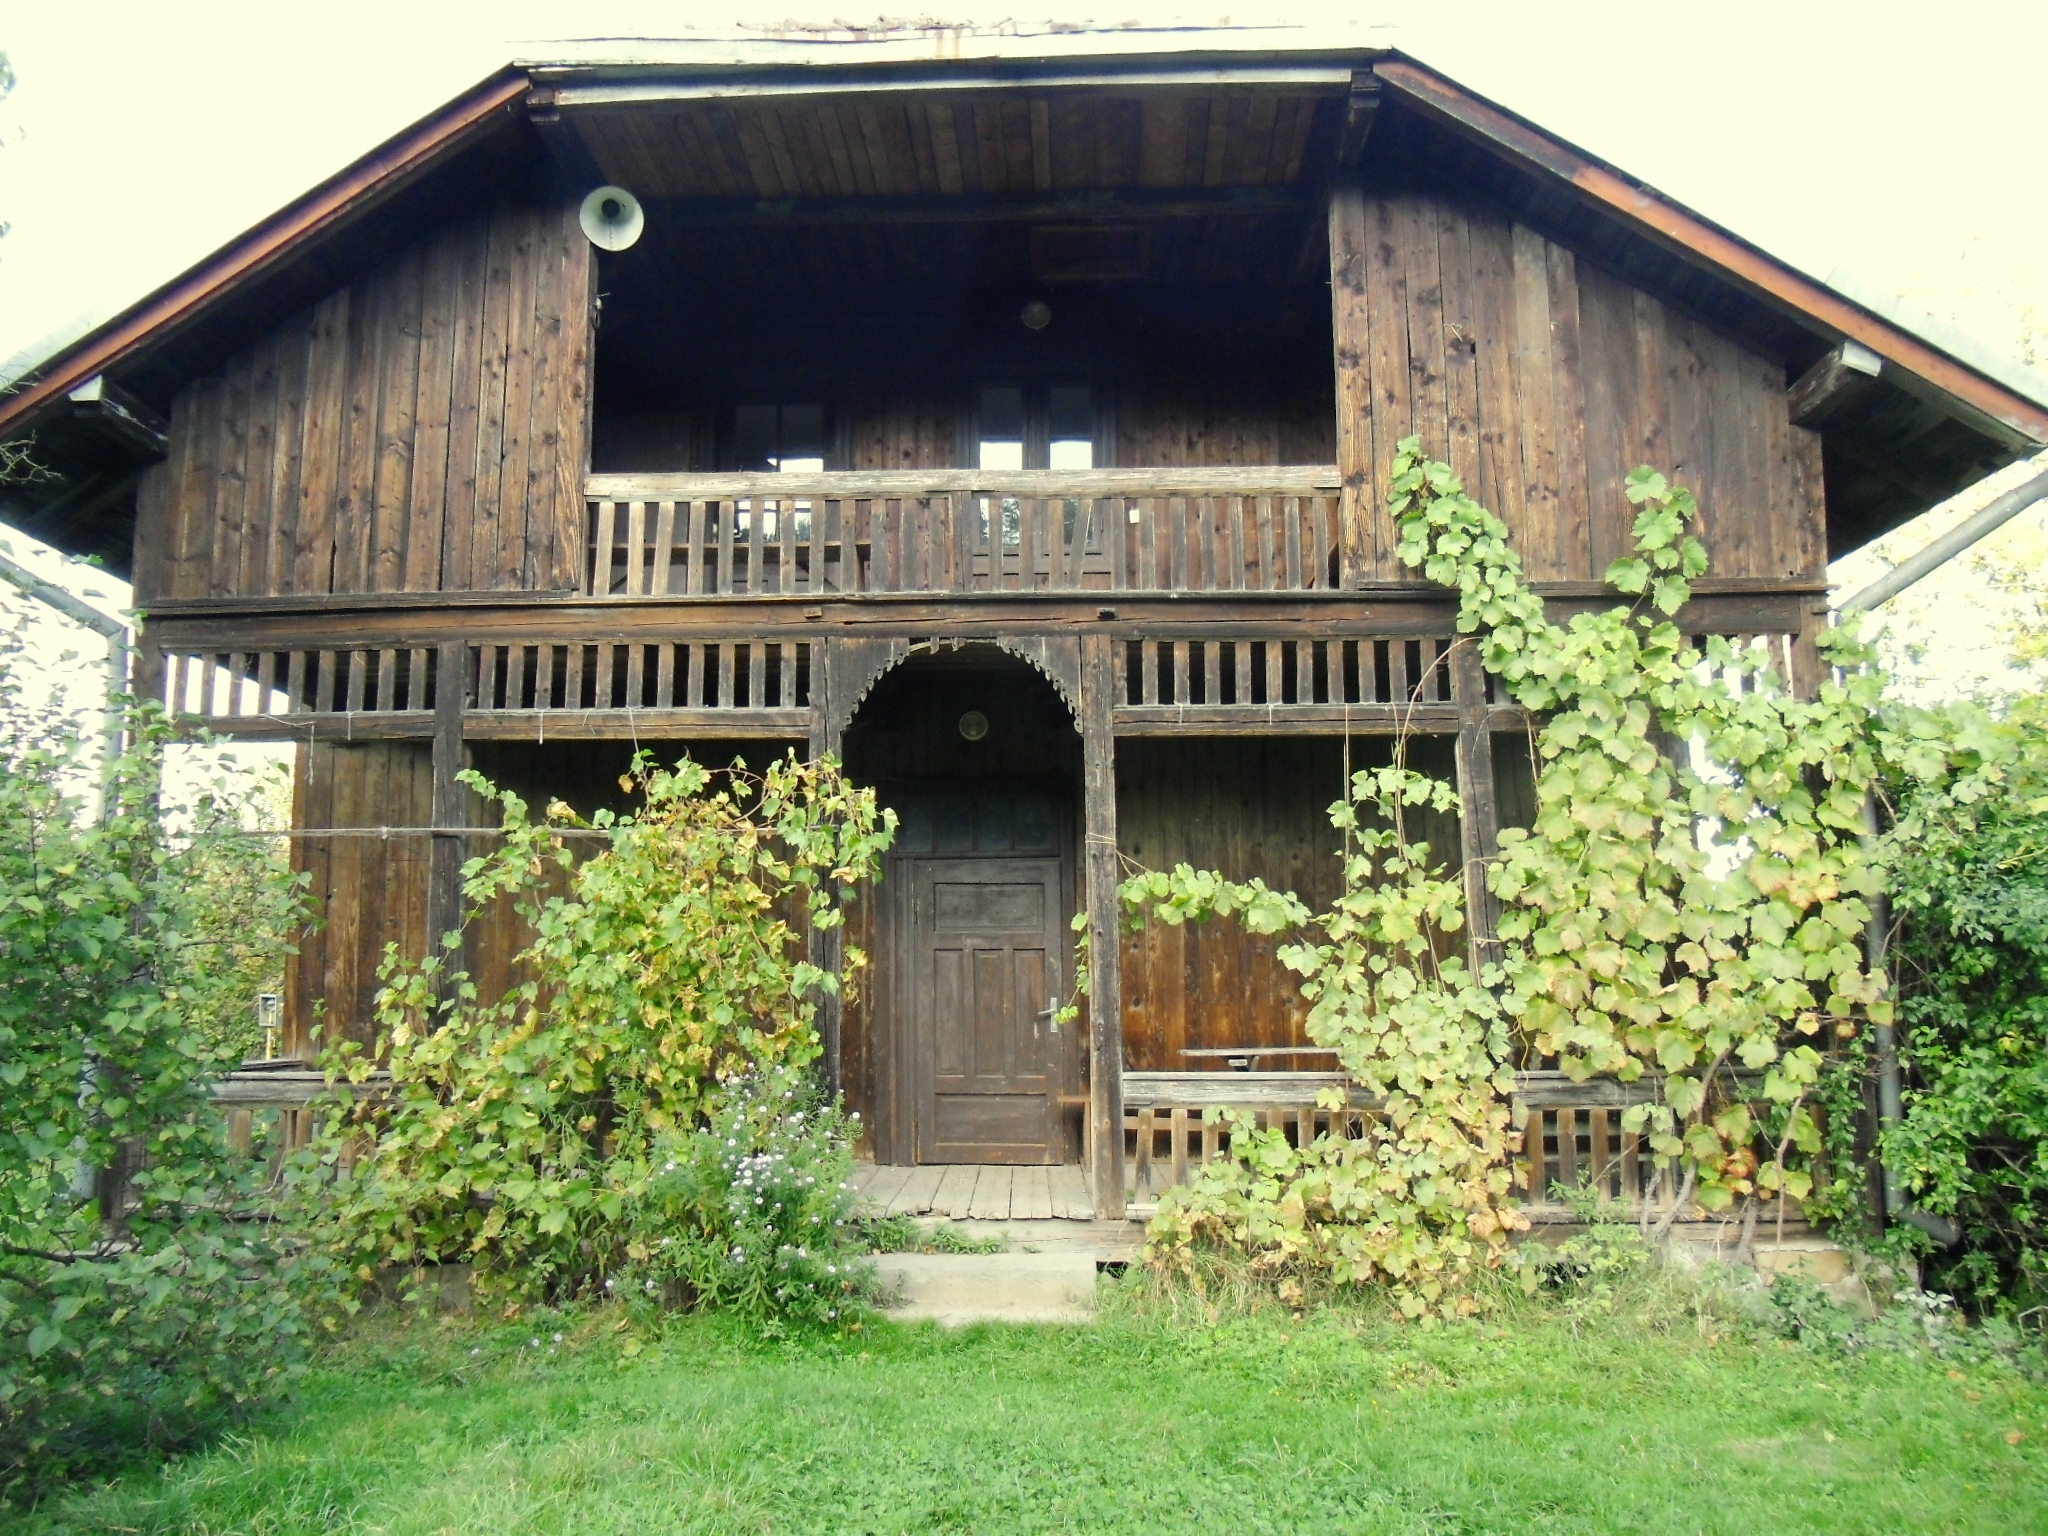 File:Ancient wooden house in the village Dubyna.JPG - Wikimedia Commons